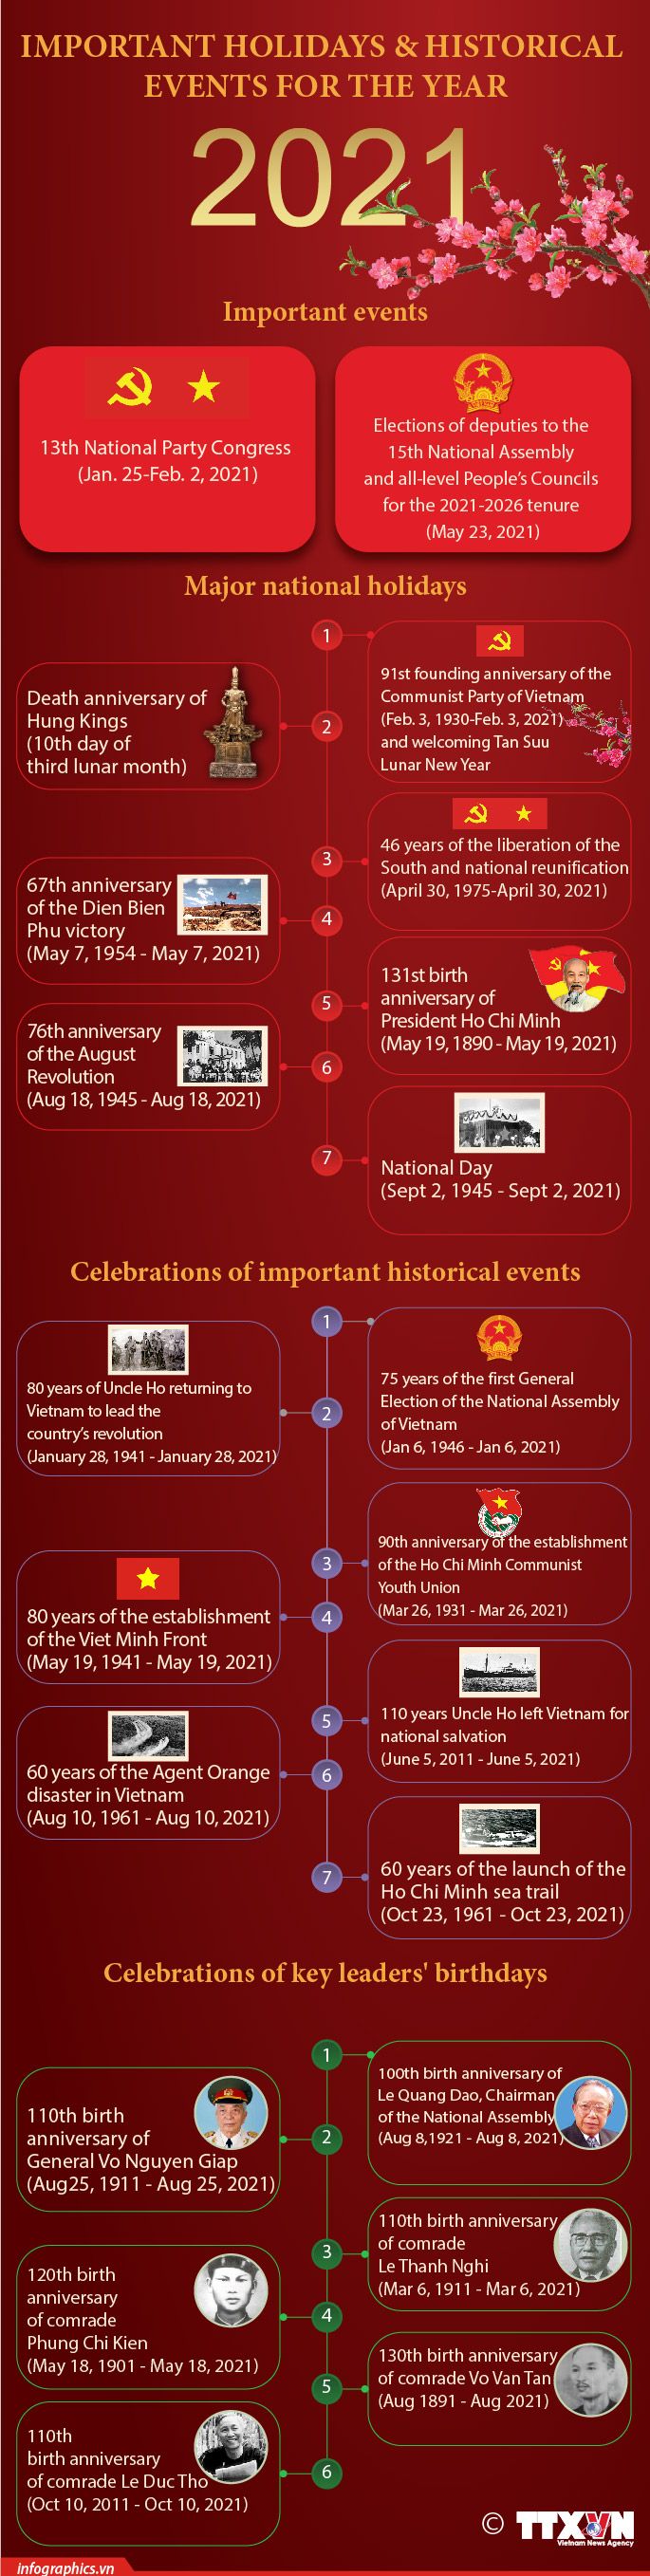 Important holidays and historical events for 2021